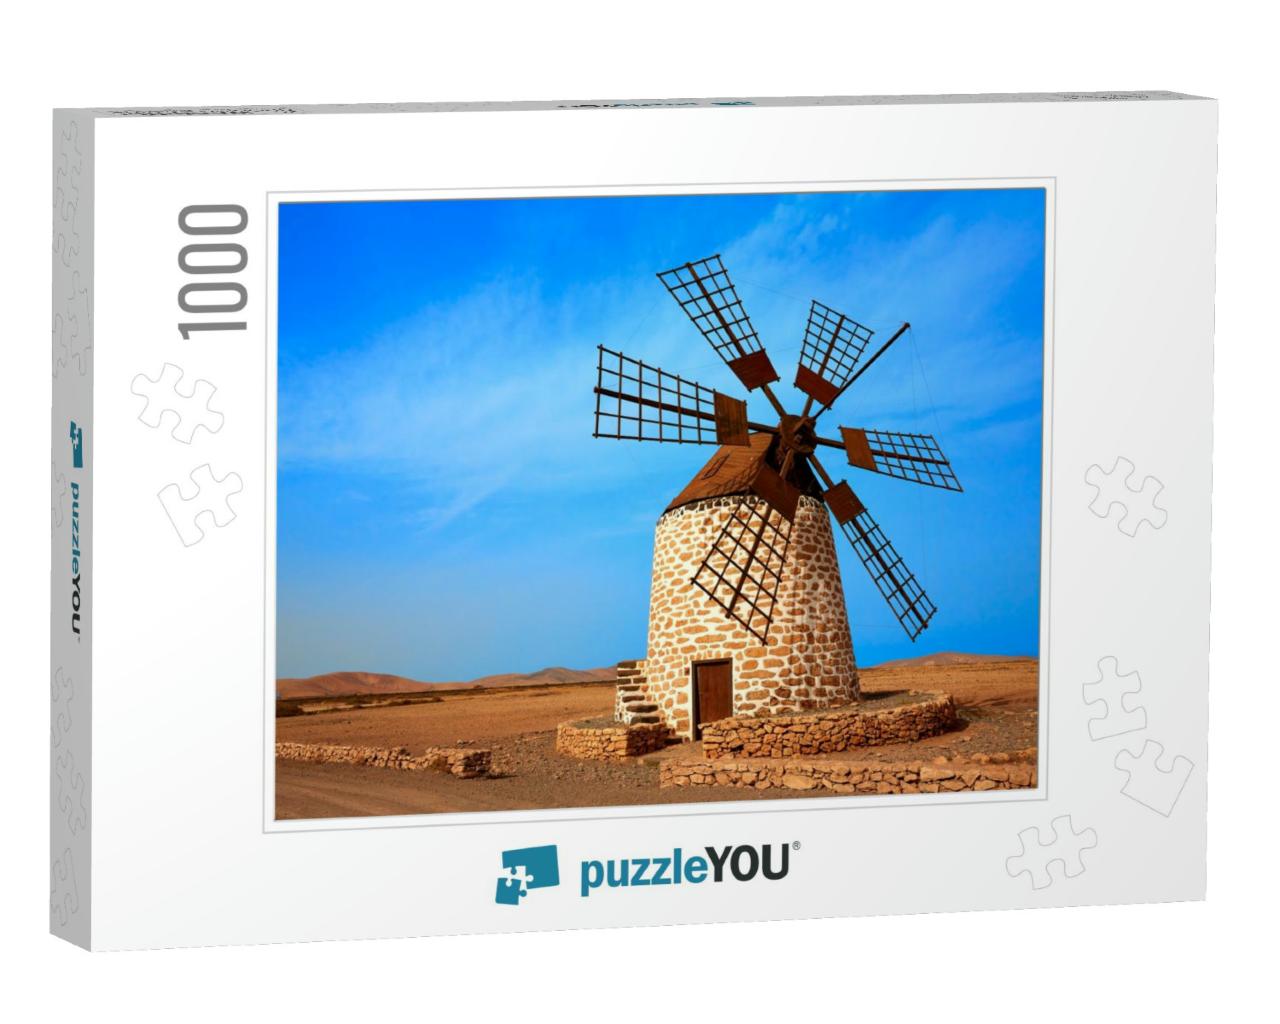 Tefia Windmill Fuerteventura At Canary Islands of Spain... Jigsaw Puzzle with 1000 pieces